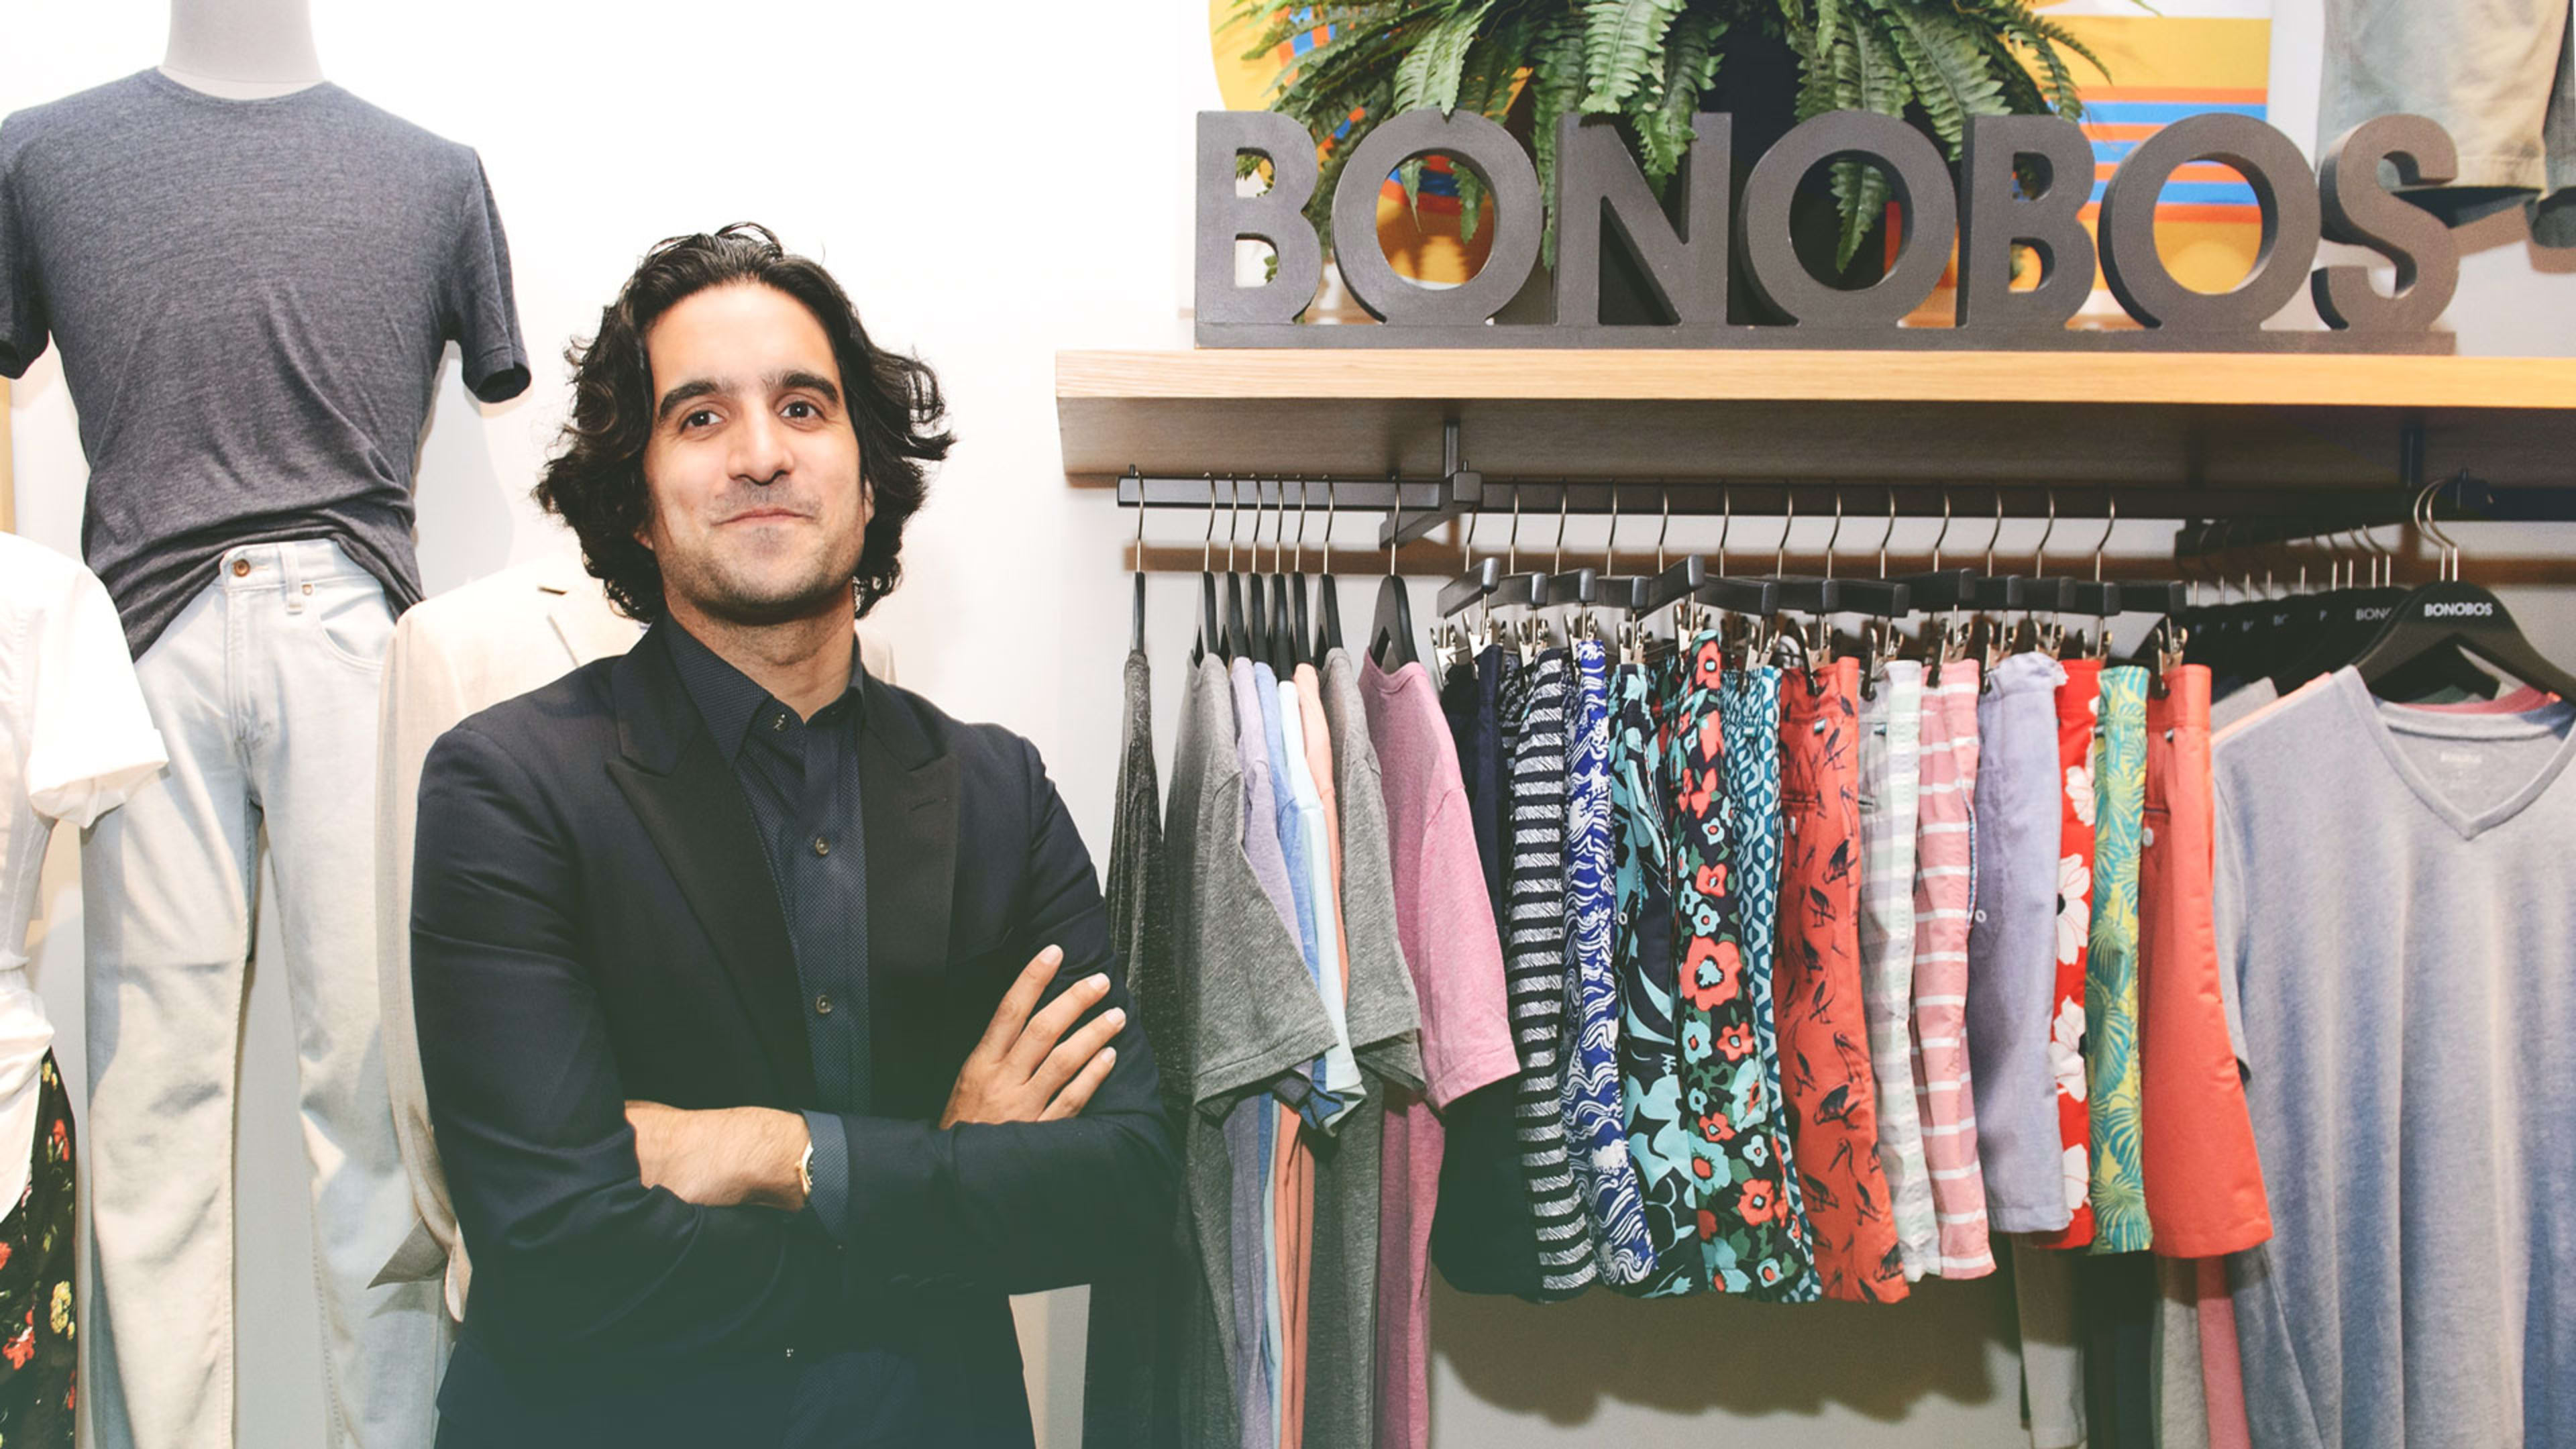 Bonobos Founder Andy Dunn Knows You Might Be Mad At Him For Joining Walmart